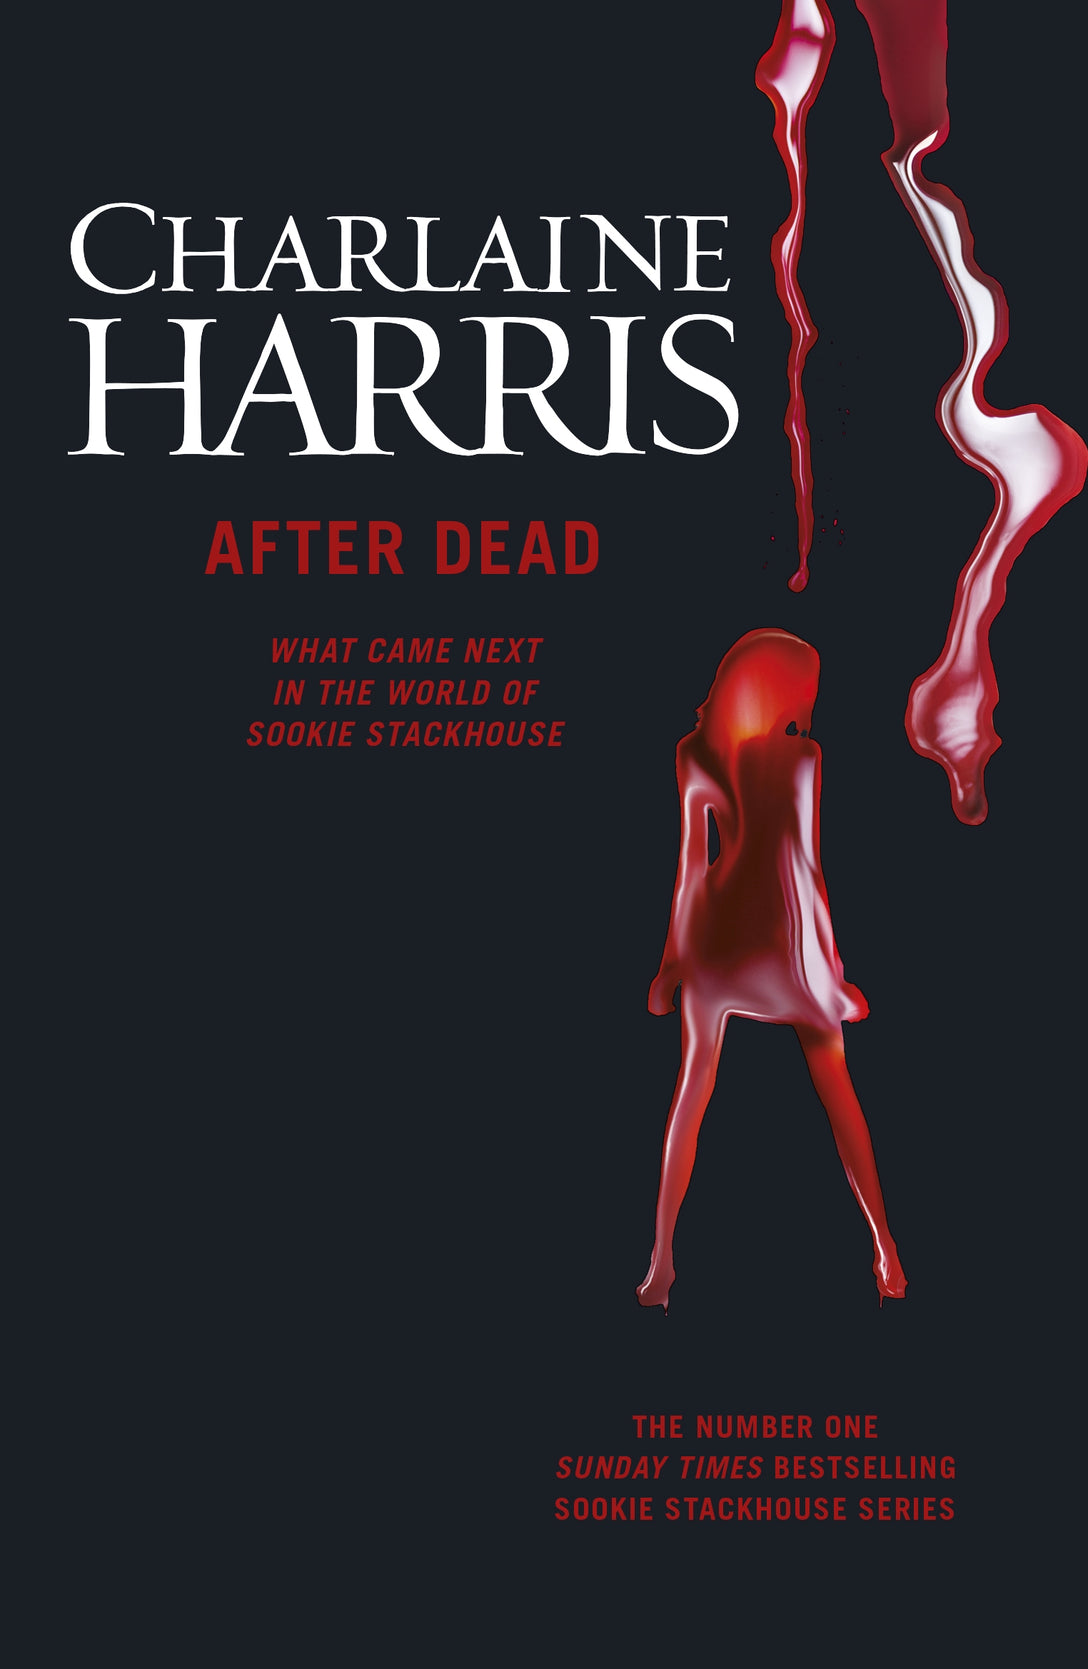 After Dead by Charlaine Harris